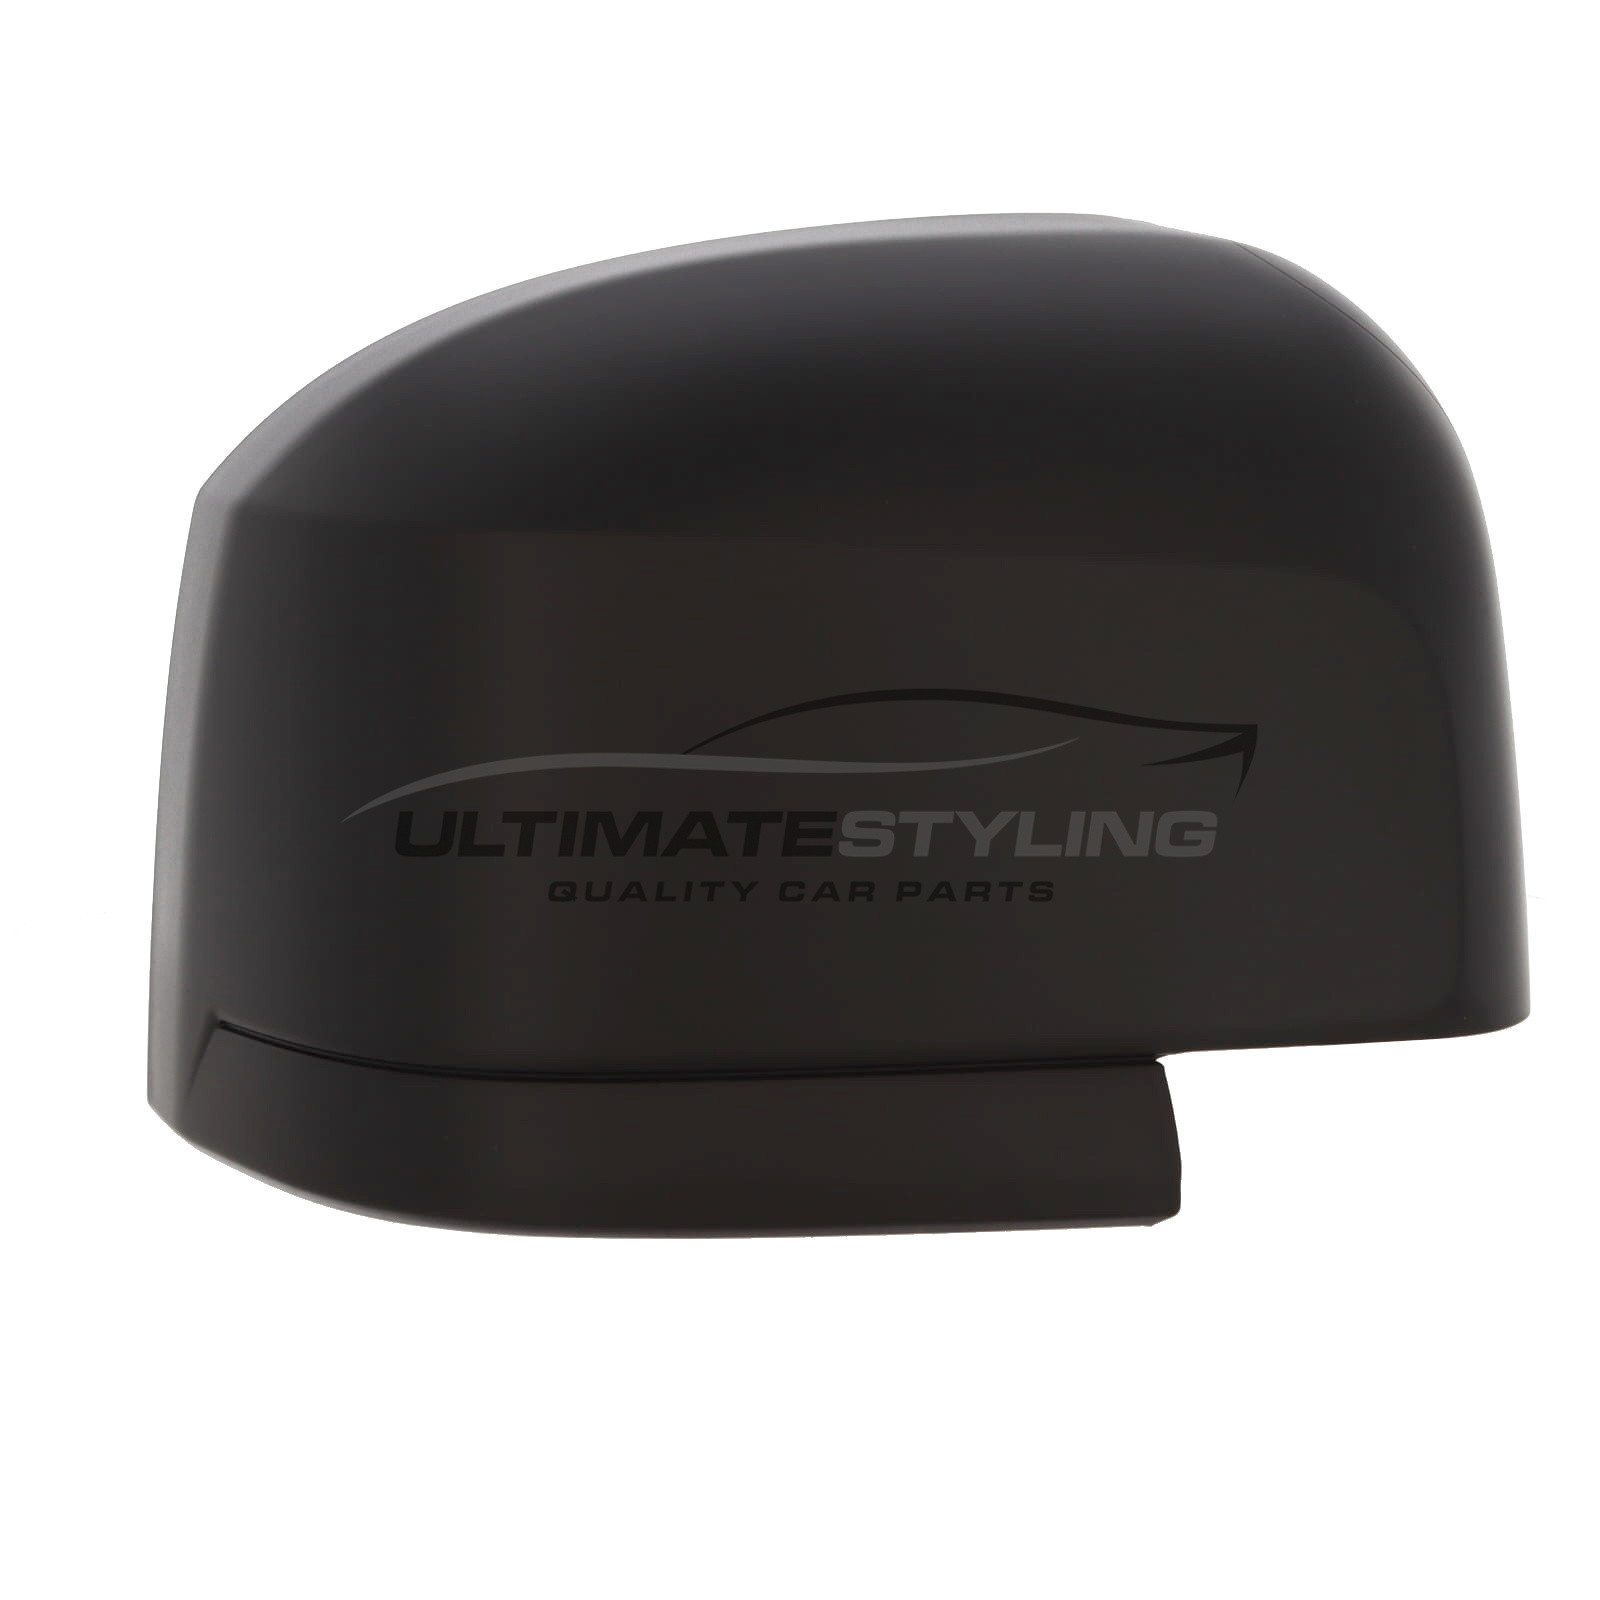 Wing Mirror Cover for VW Crafter